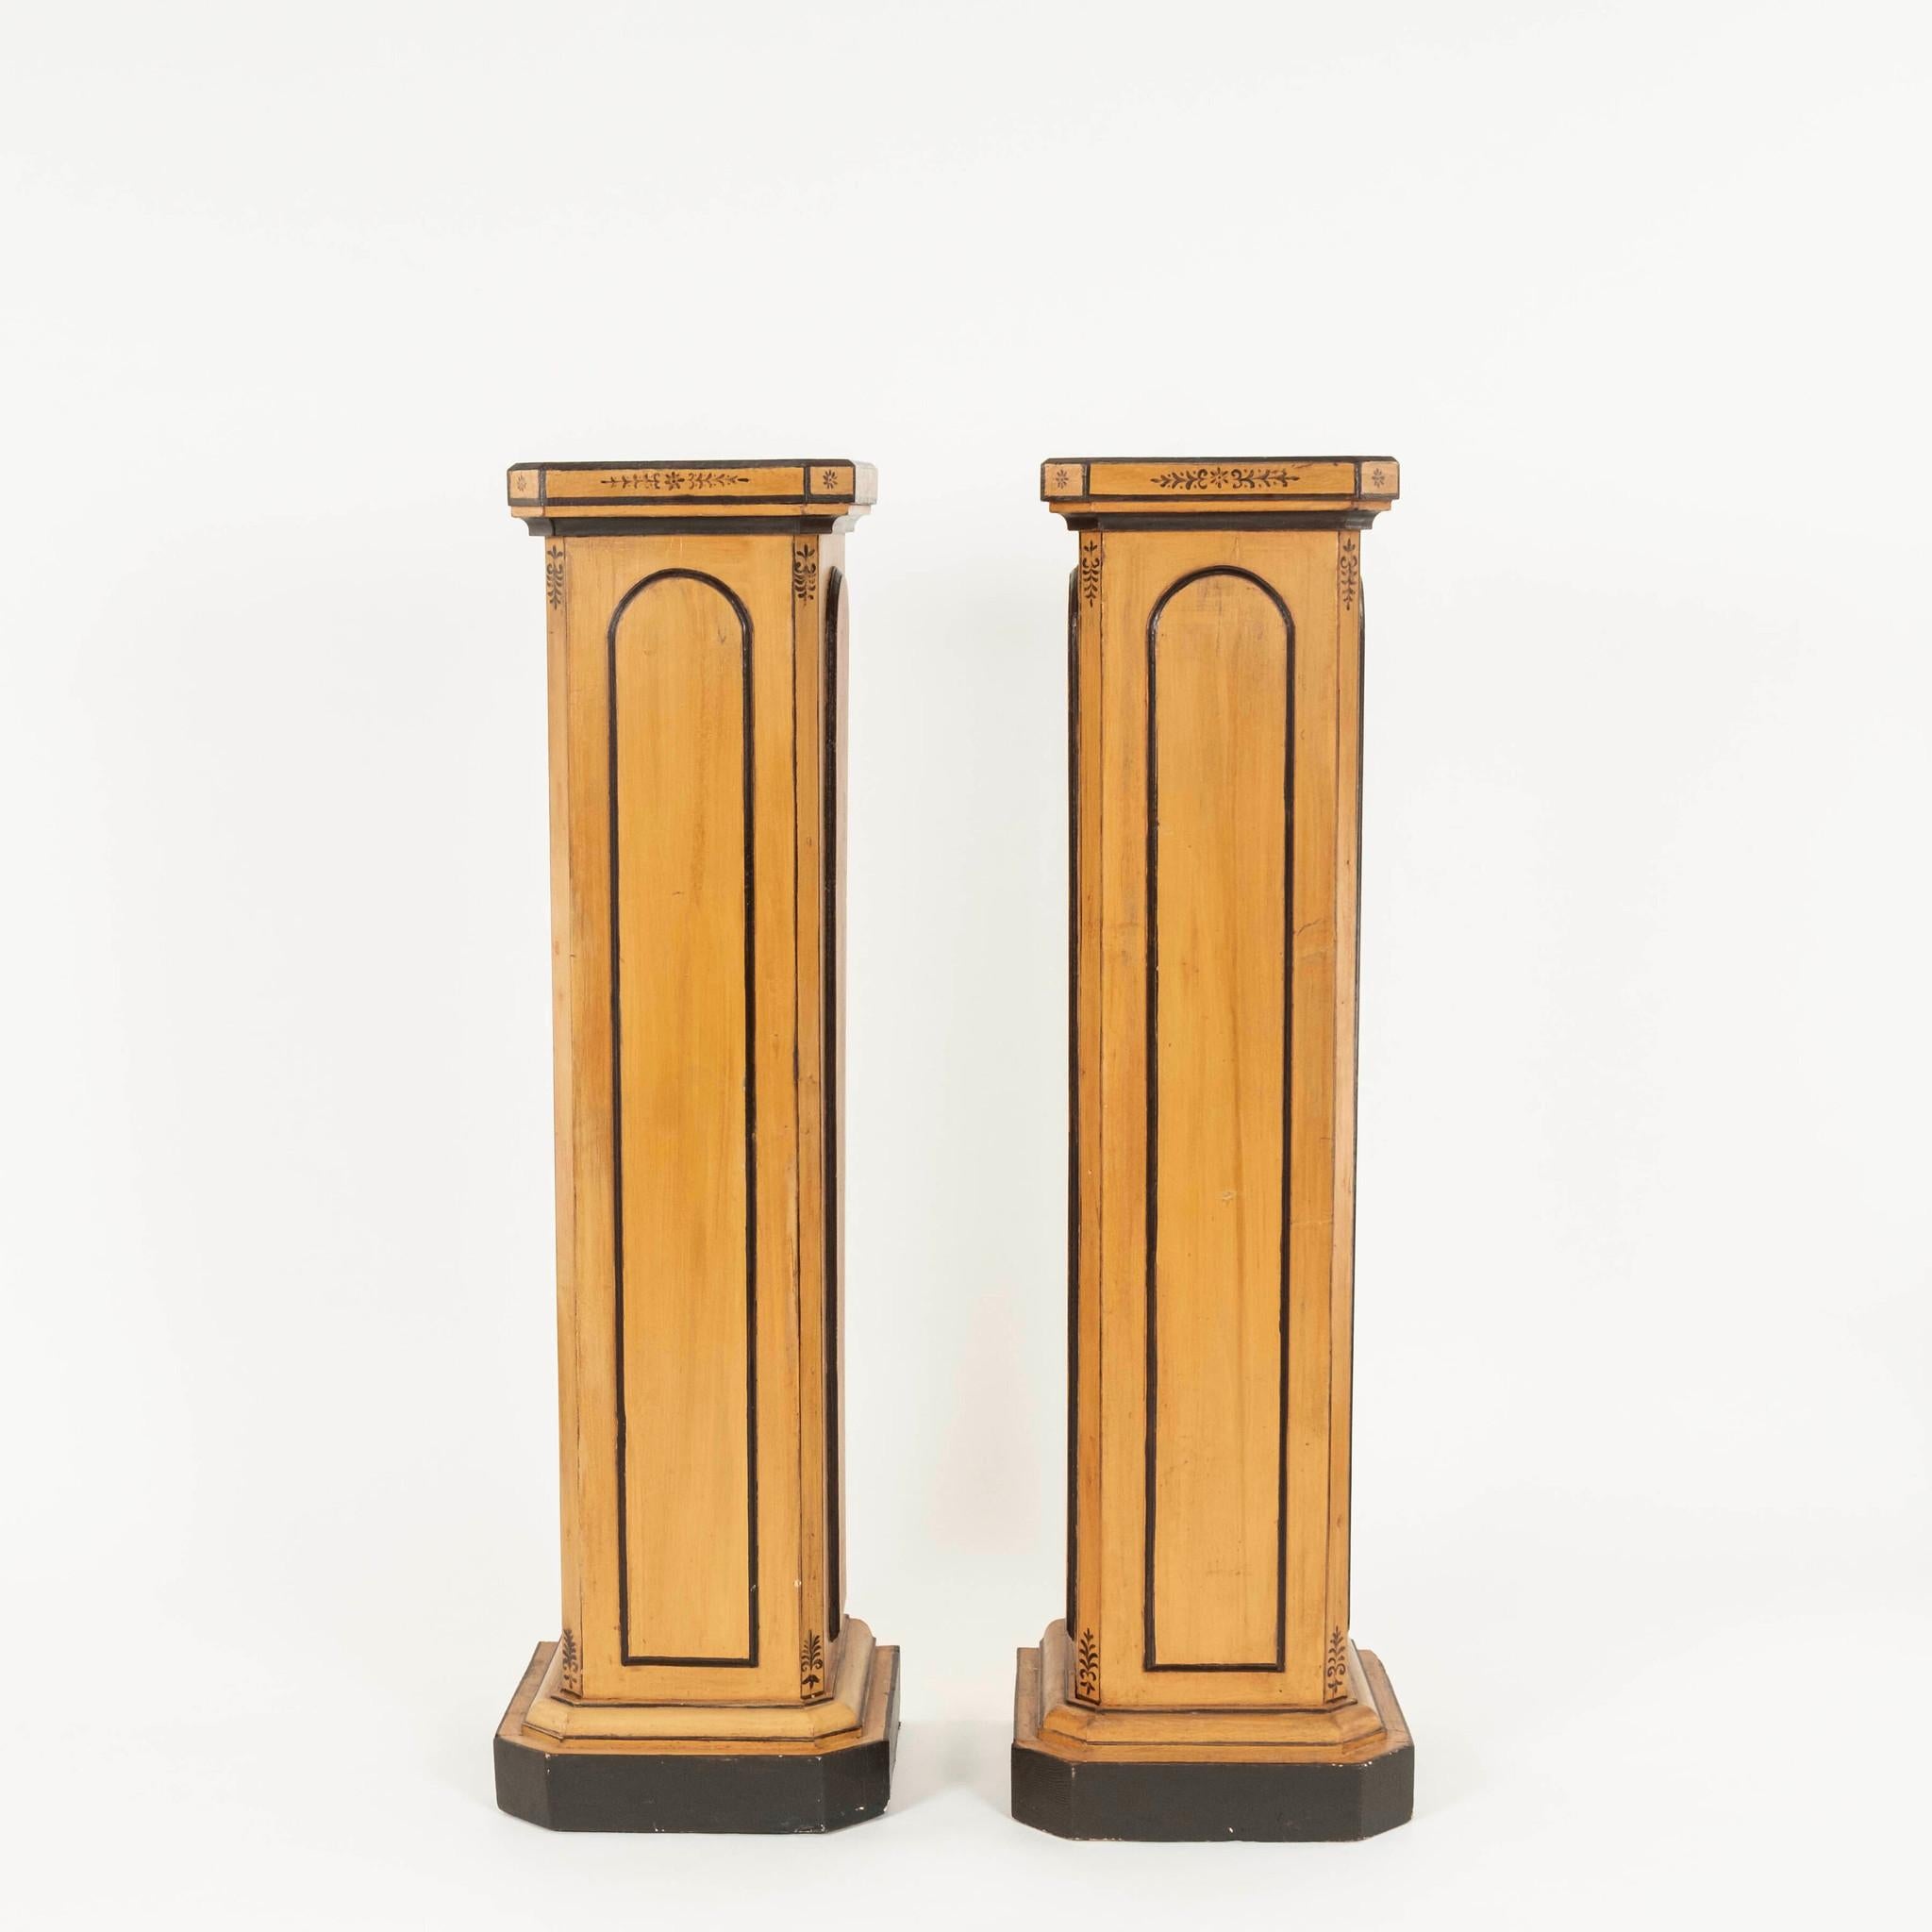 A pair of 19th Century French Charles X painted wood column pedestals. This lovely pair features arched raised panels accented with dark painted trim detail.